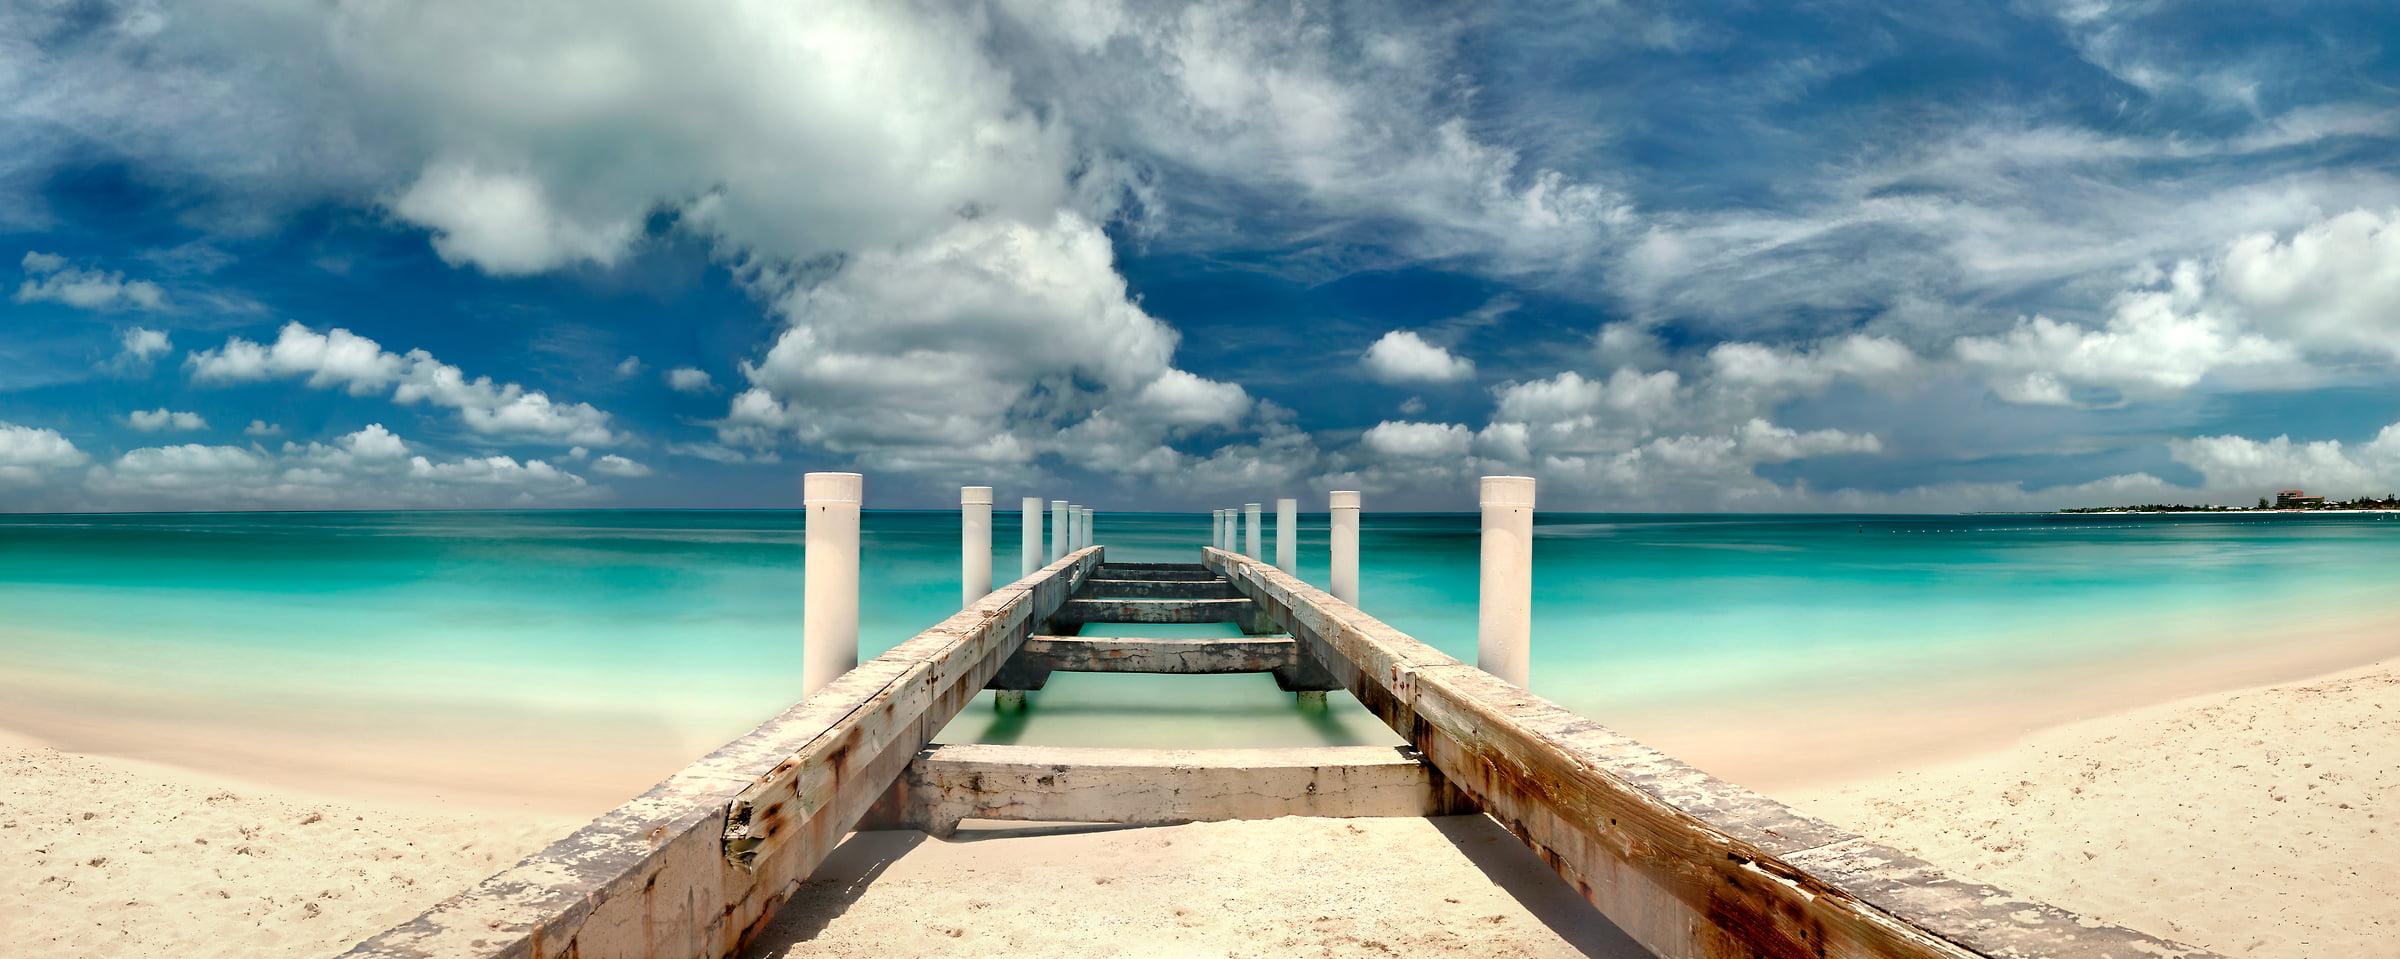 245 megapixels! A very high resolution photo of a beach and blue ocean with an old pier; VAST photo created by Phil Crawshay in Grace Bay, Turks and Caicos Islands